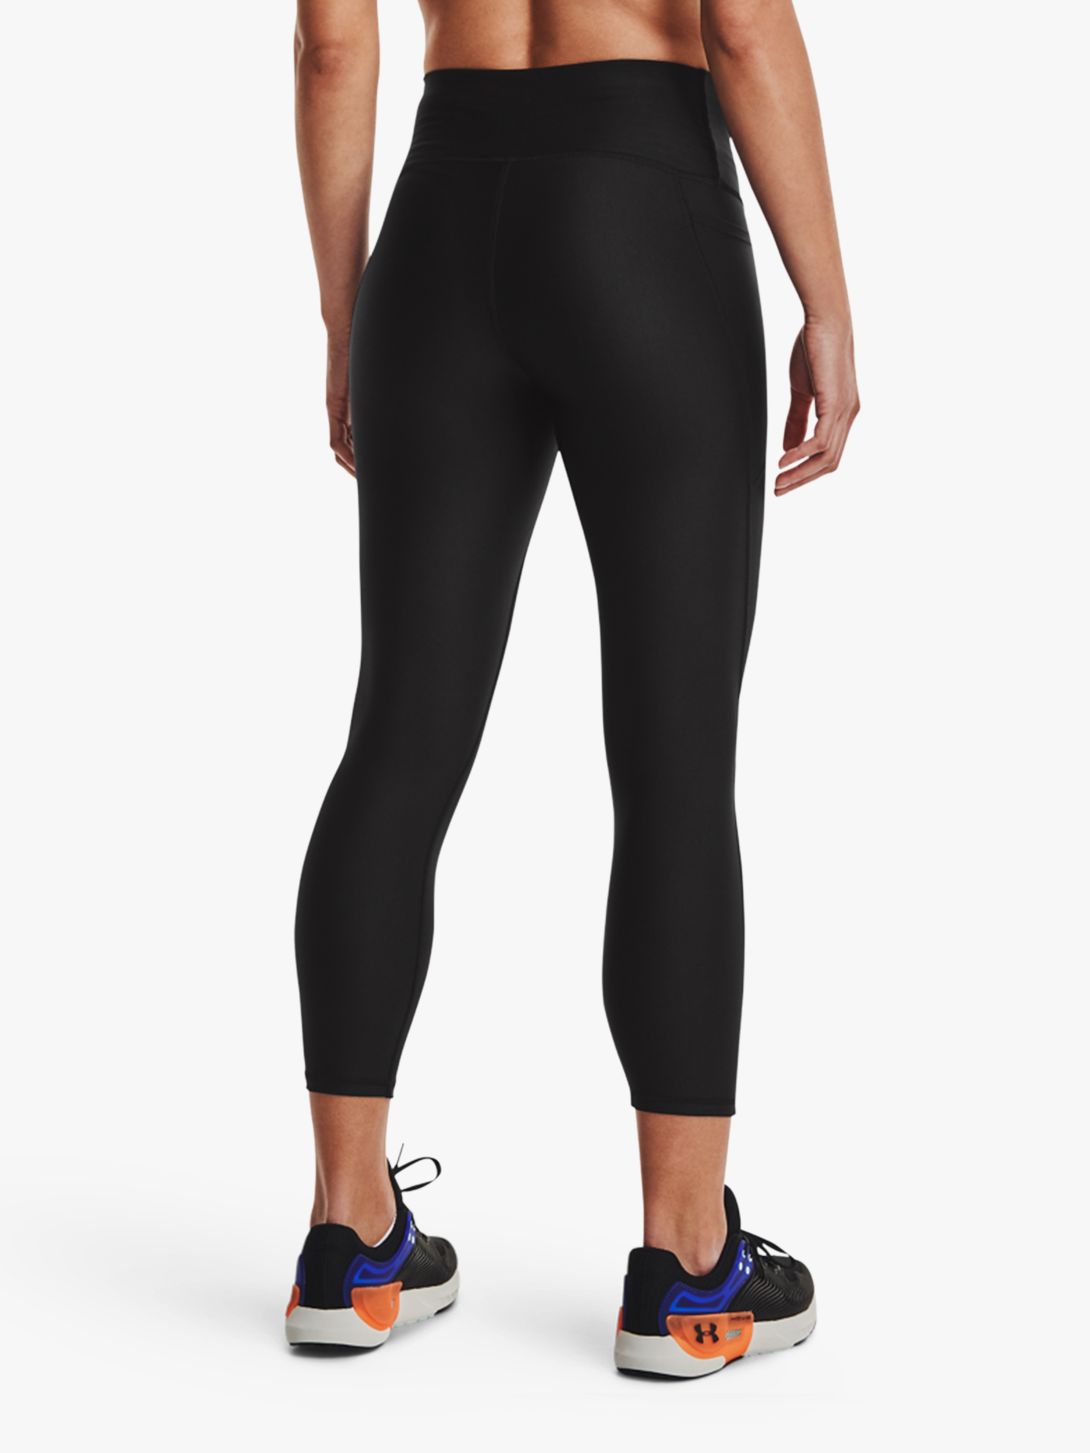 Under Armour Novelty Women's Tennis Tights - Royal/Black